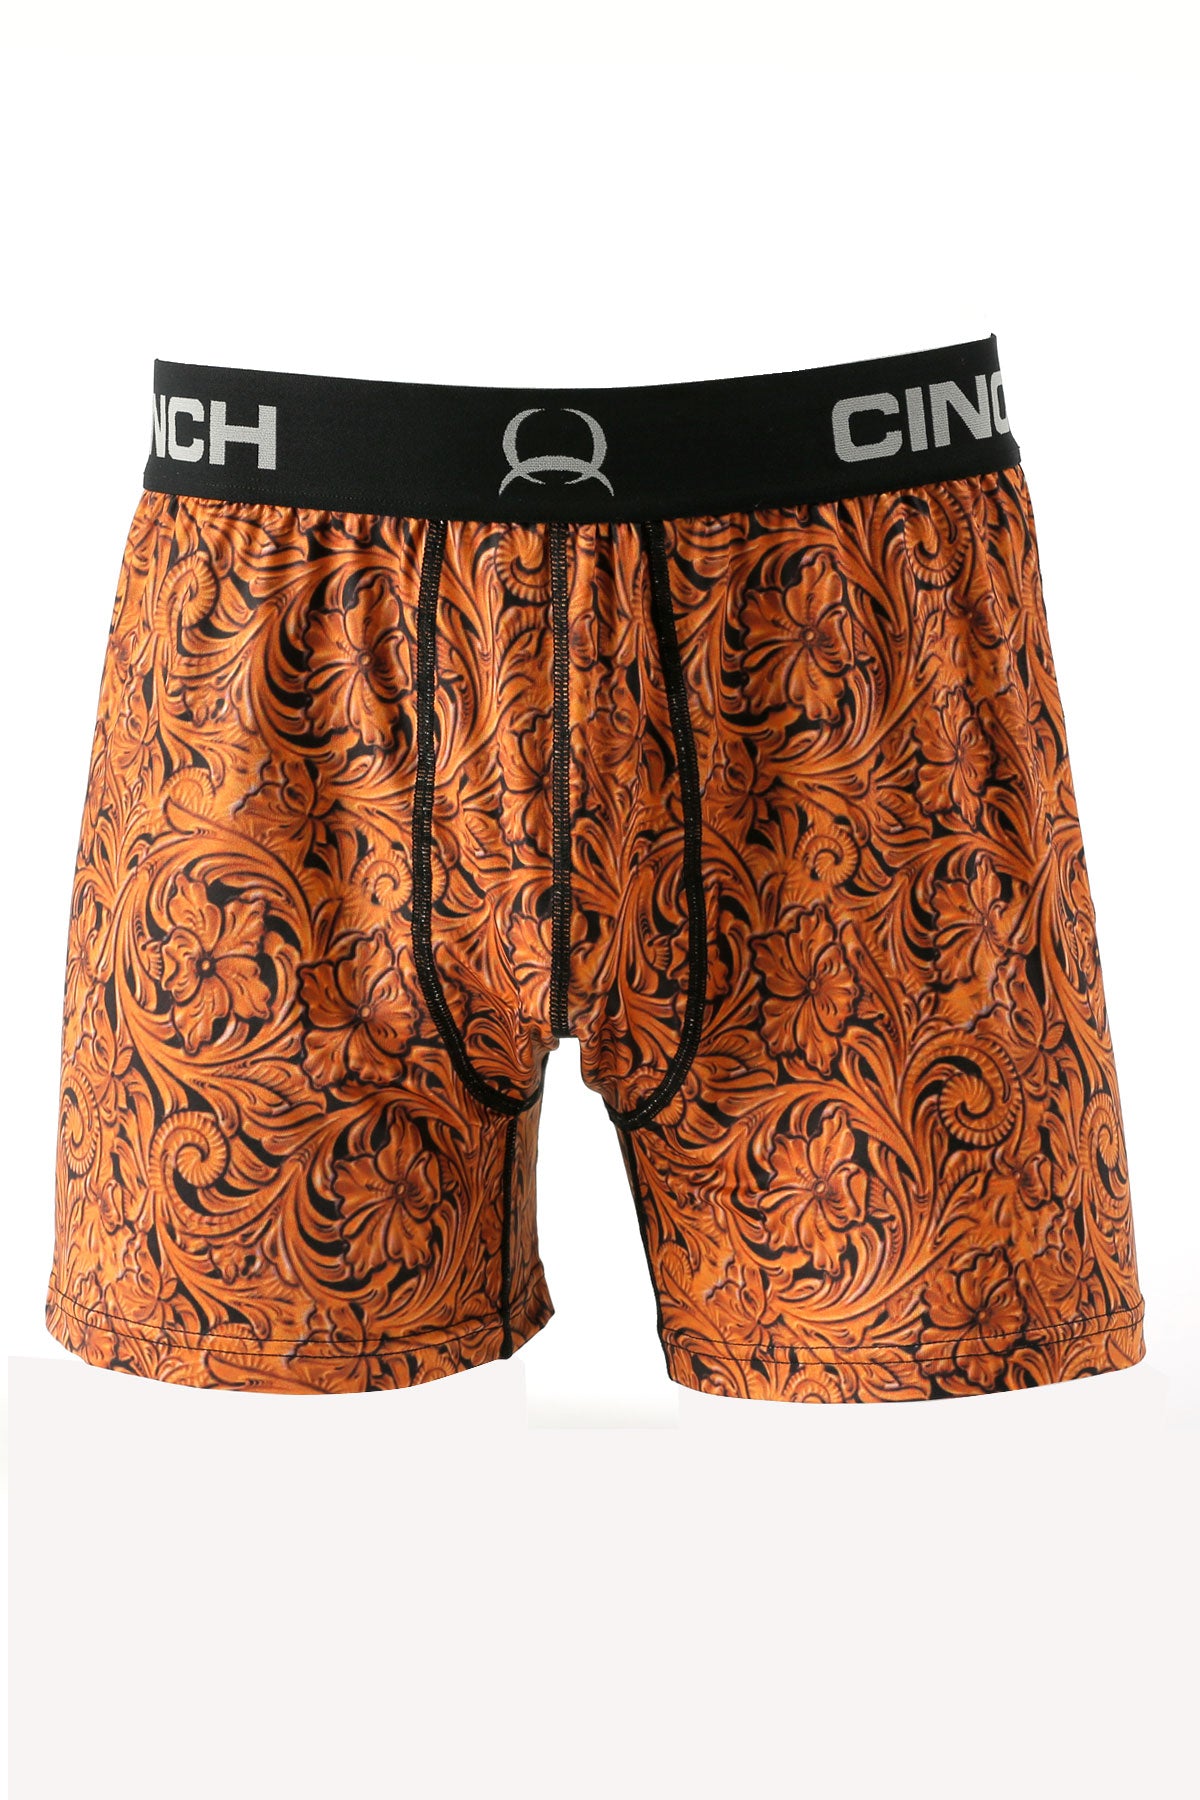 Cinch Men's Loose Fit Tooled Leather Look Boxer Briefs